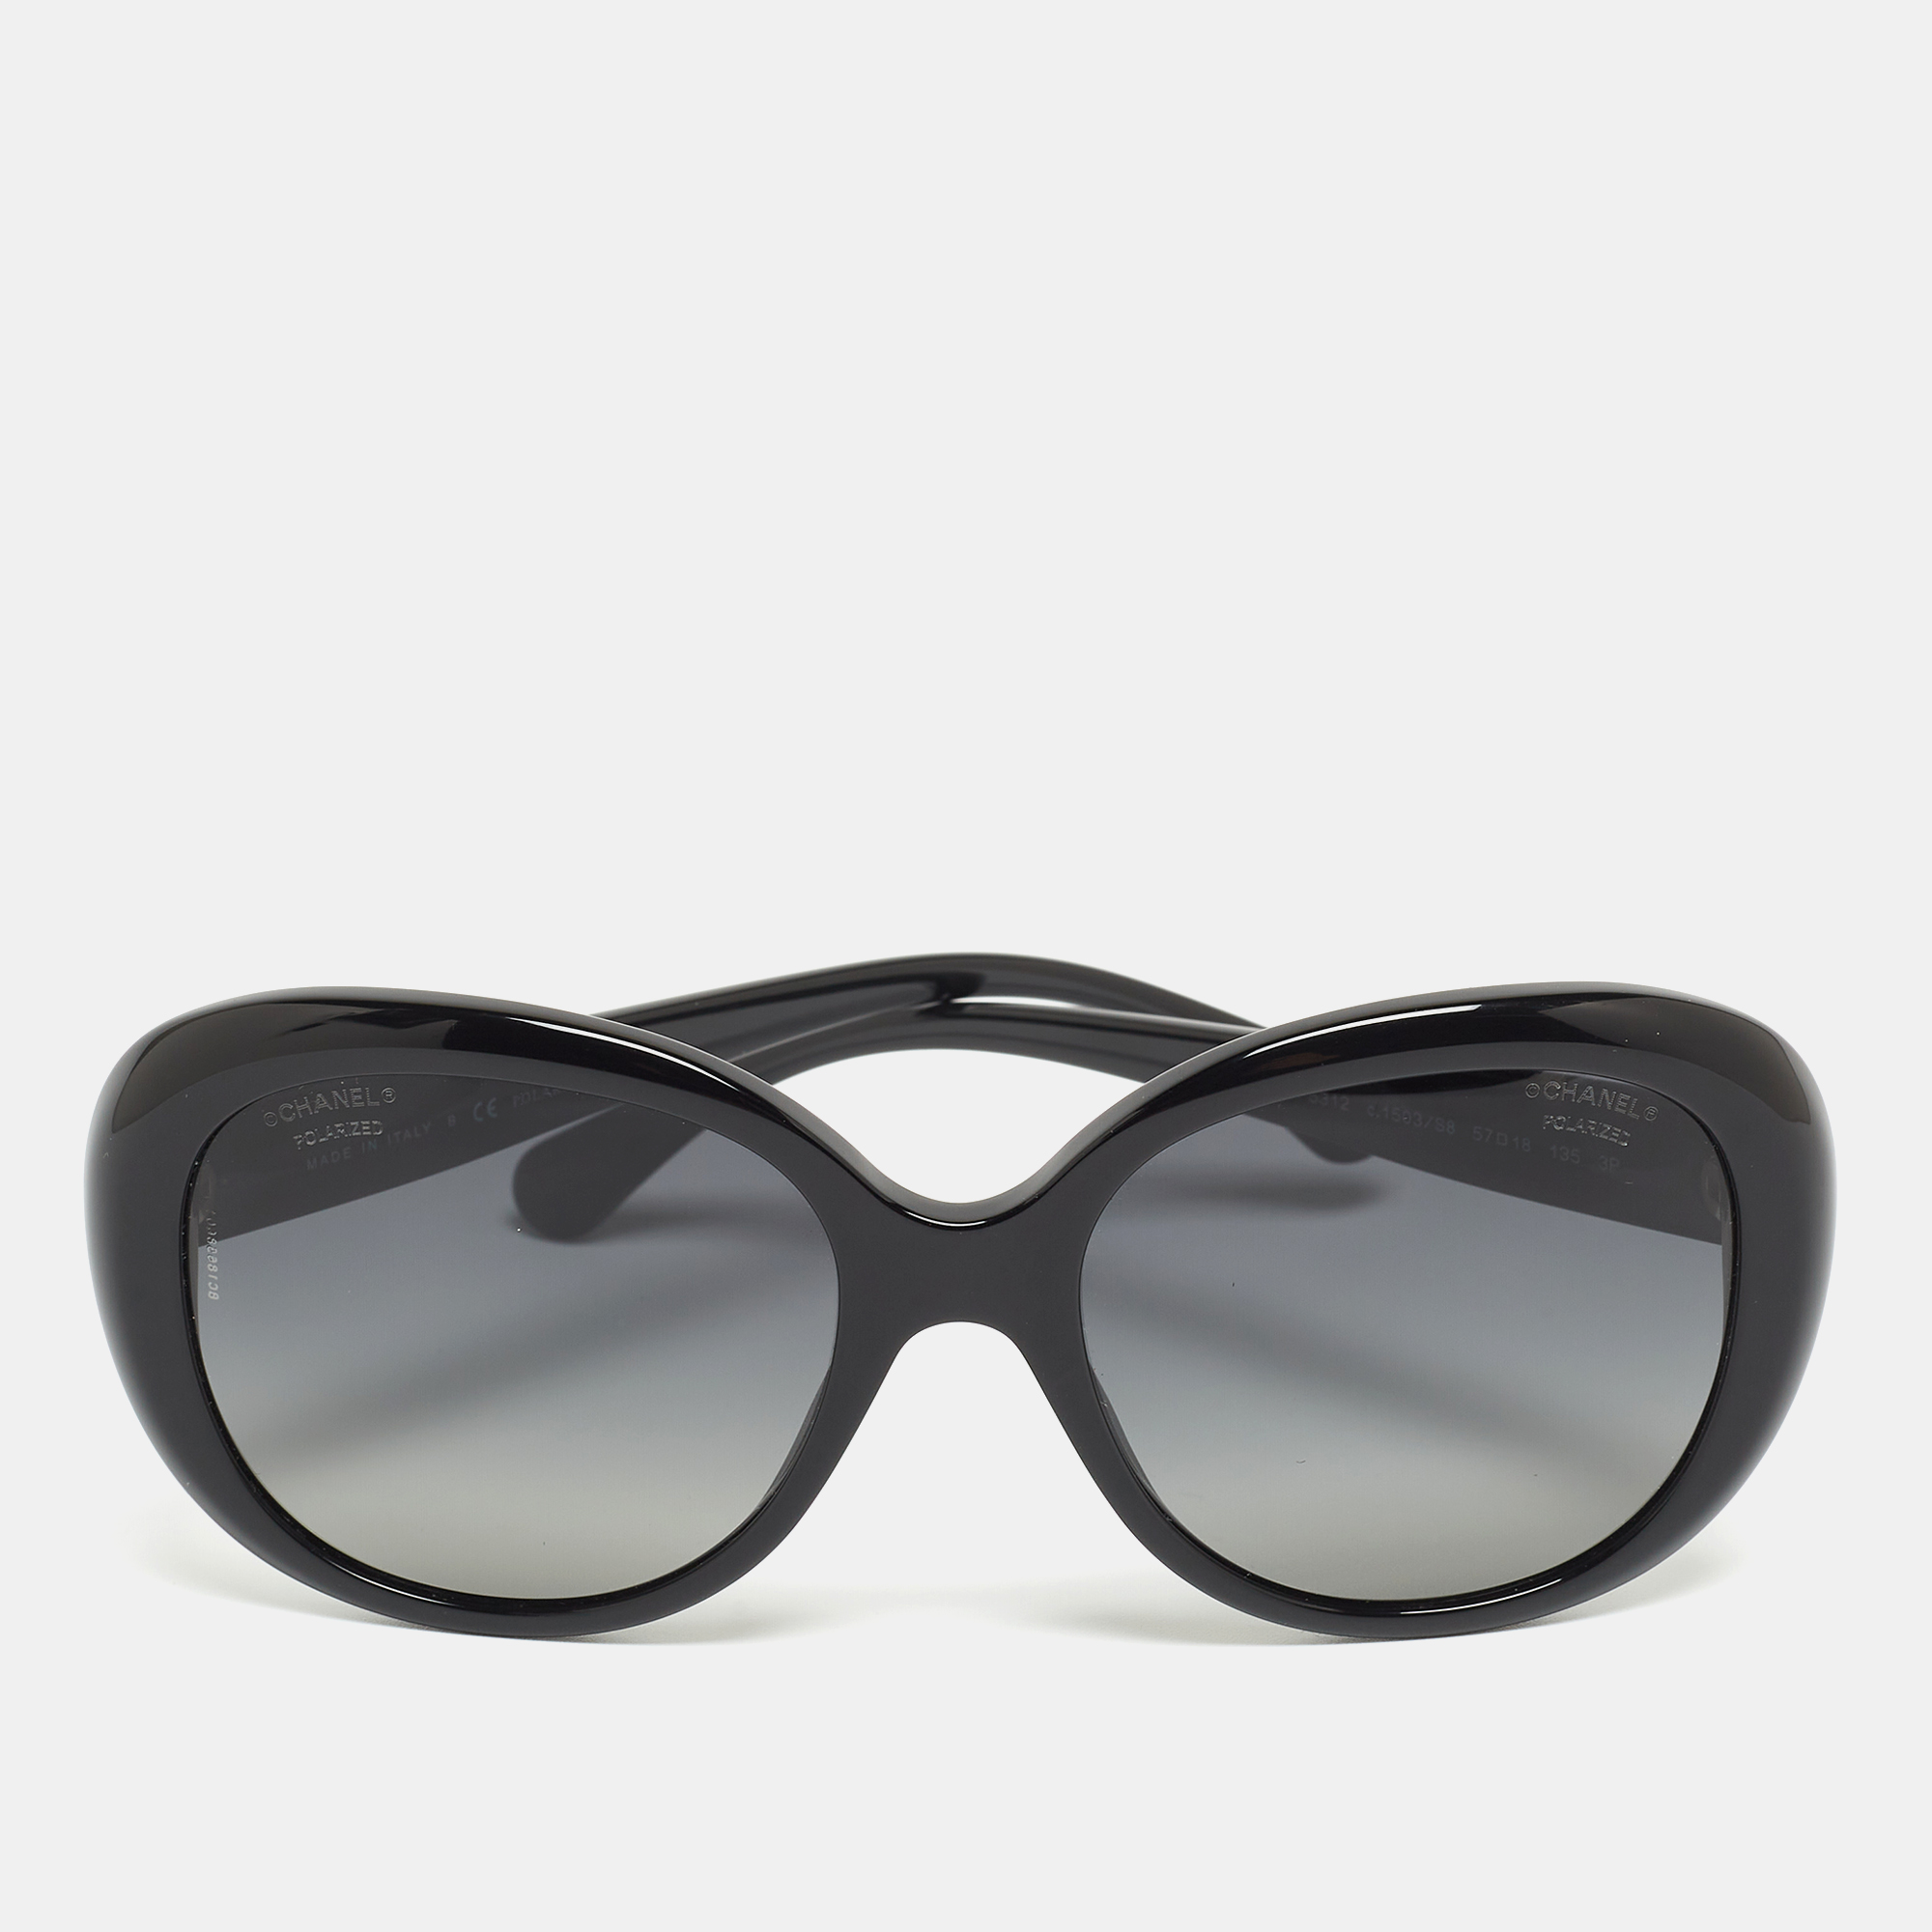 Pre-owned Chanel Black Gradient 5312 Oval Sunglasses